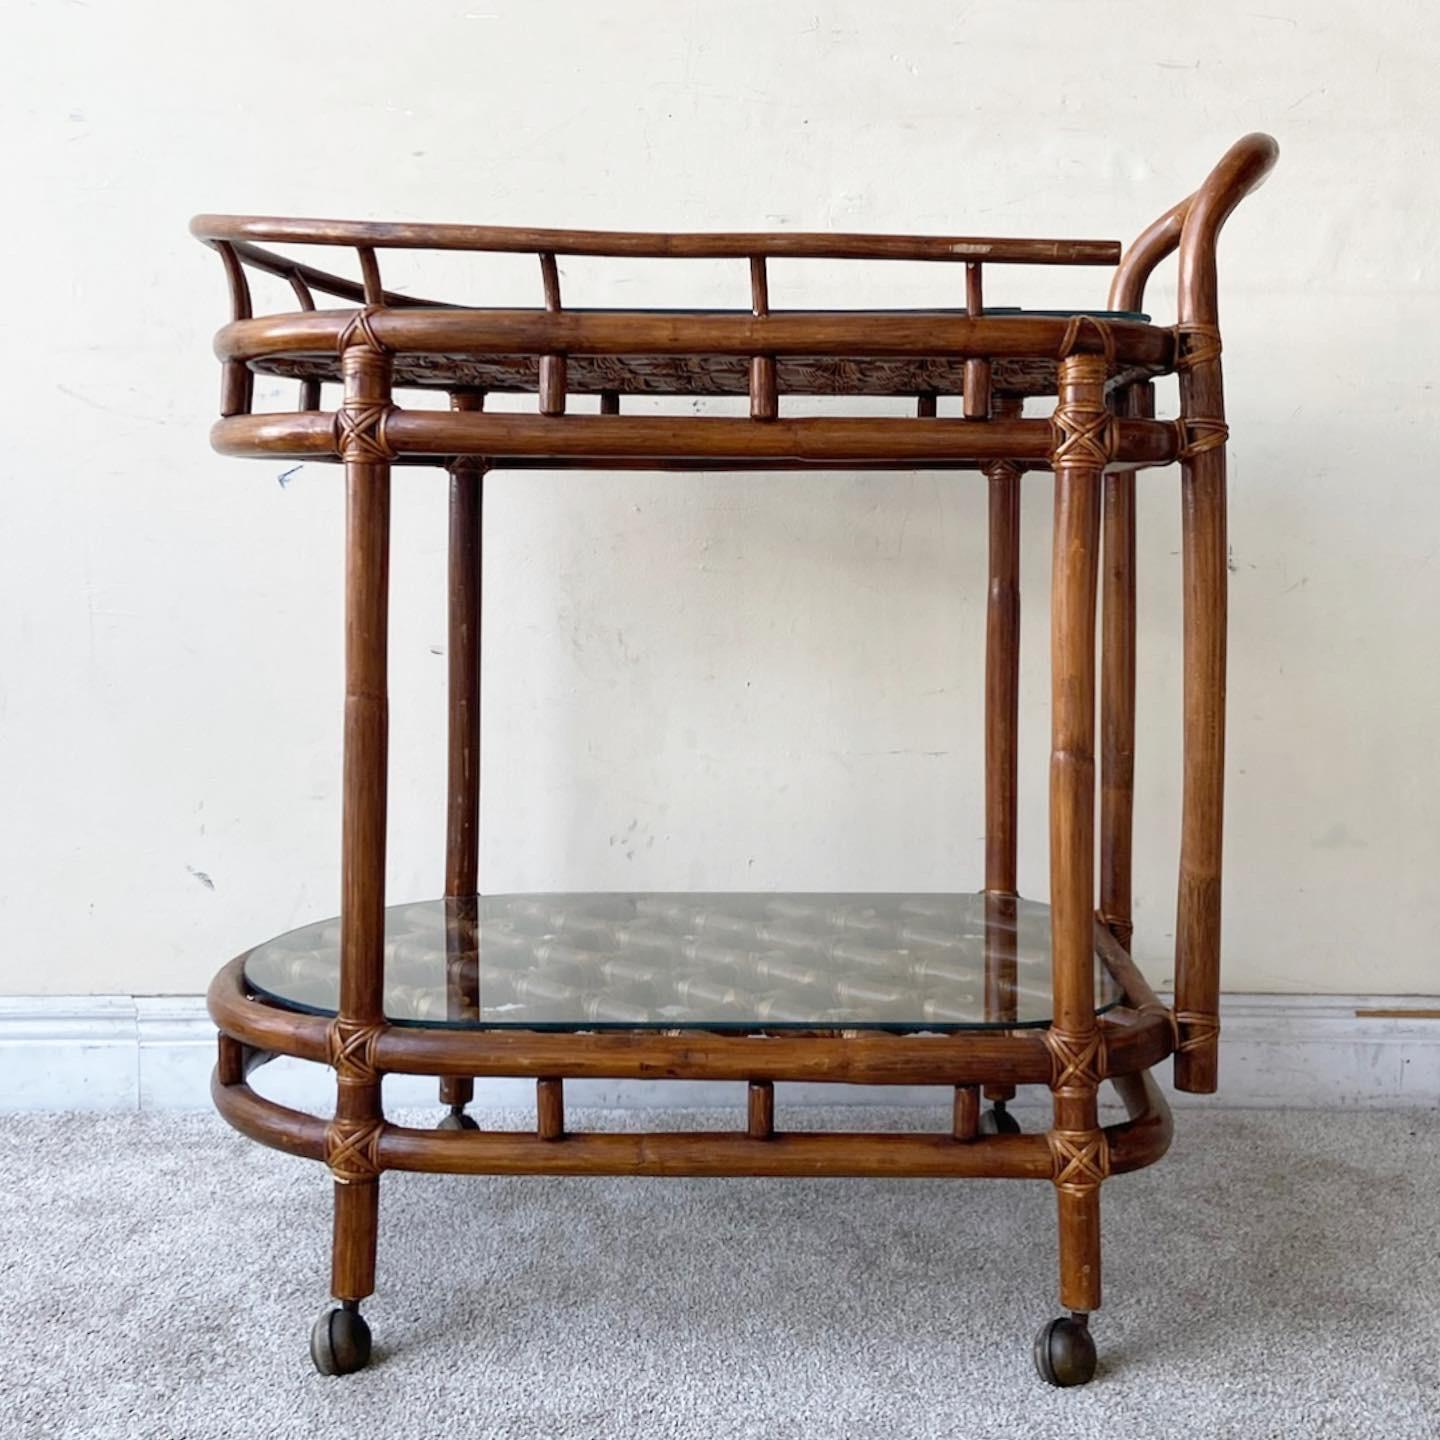 Excellent vintage bohemian bamboo rattan two tier bar cart. Features a fantastic latticed bamboo on each tier.
 